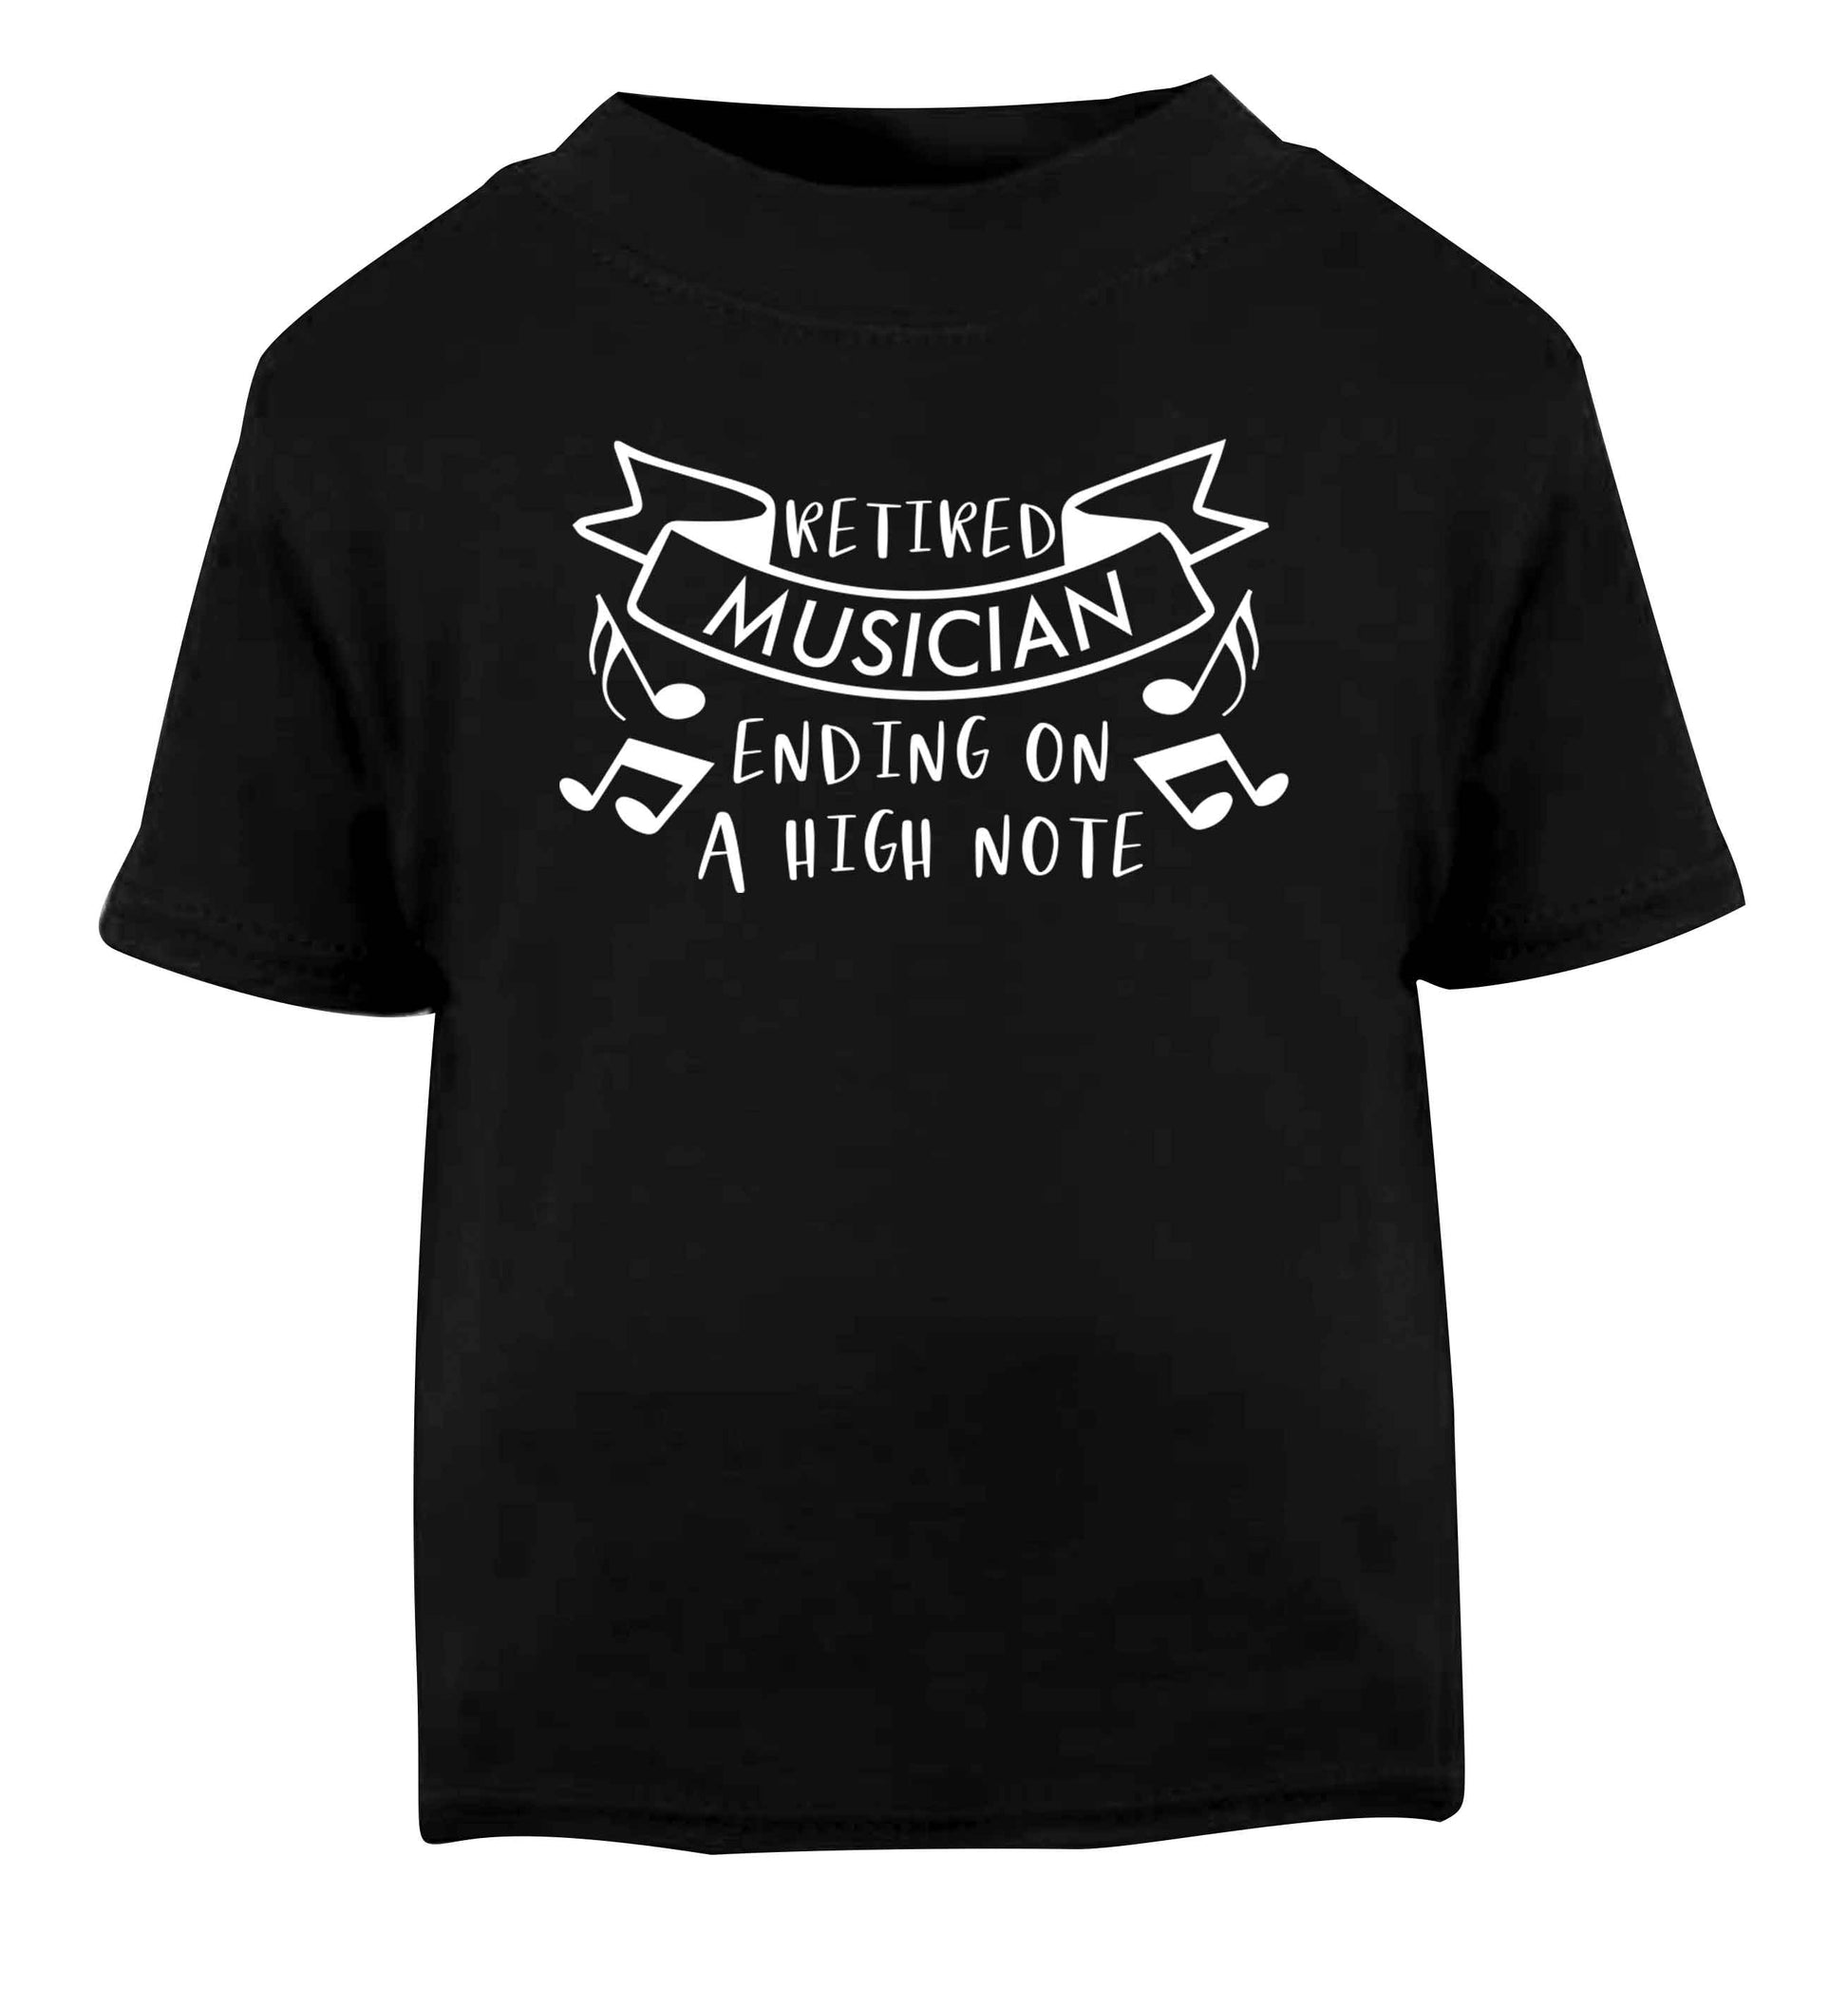 Retired musician ending on a high note Black Baby Toddler Tshirt 2 years